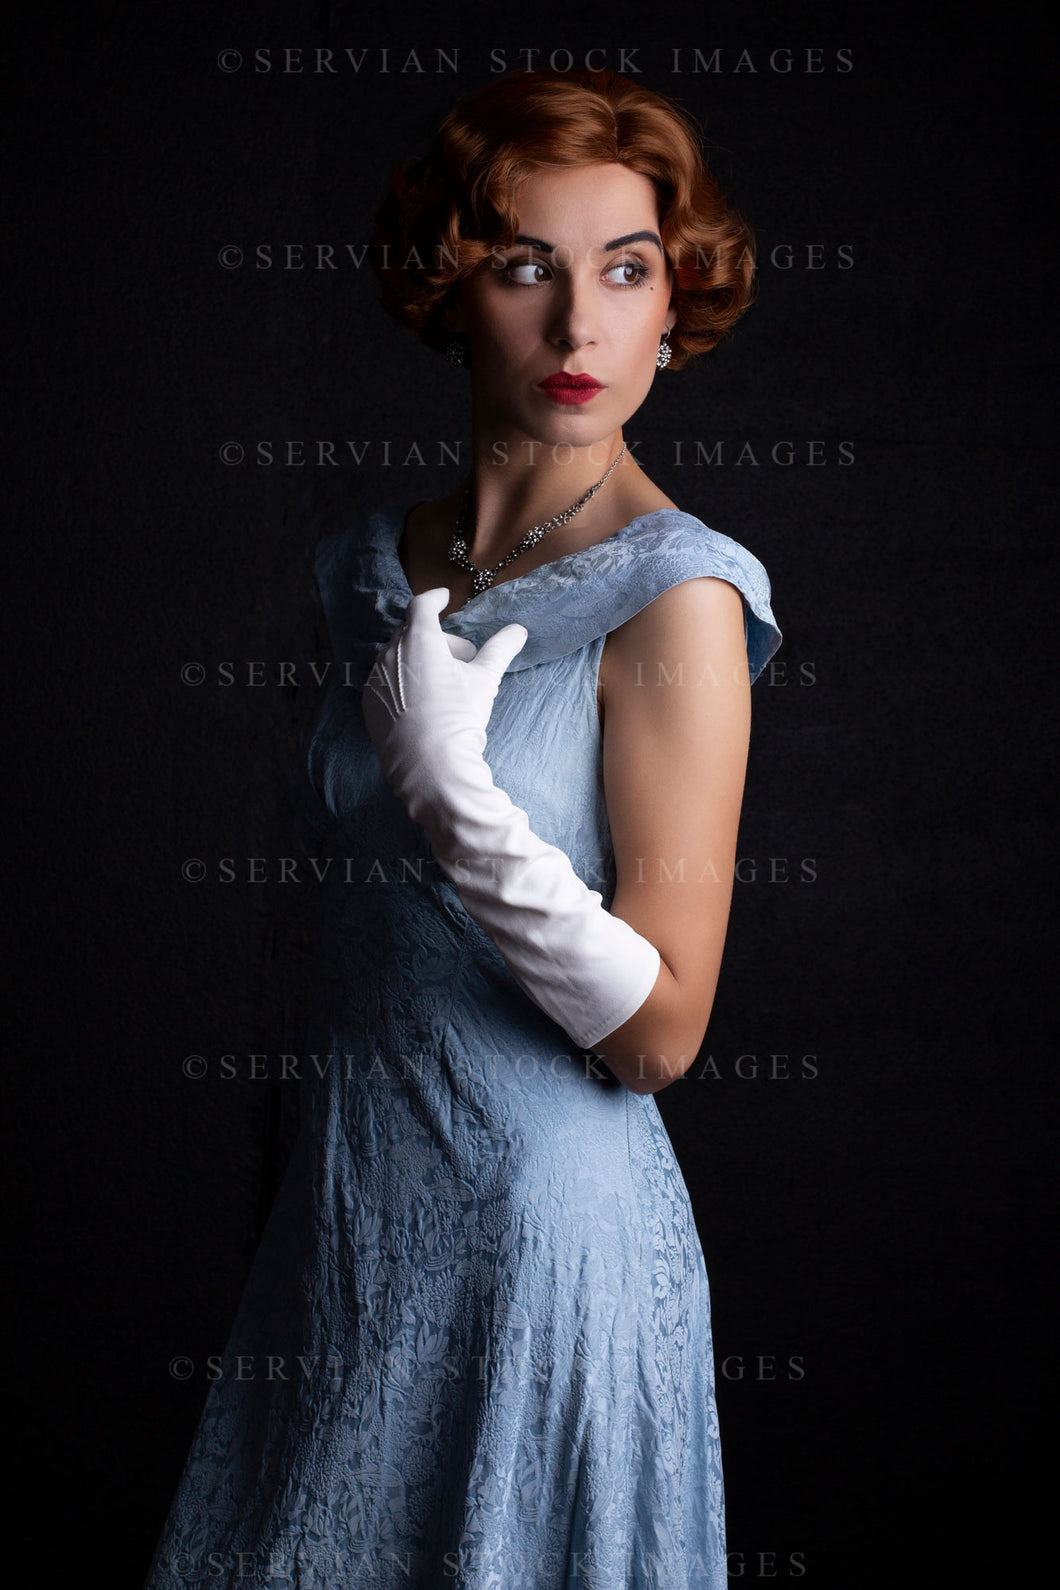 1930s woman wearing a blue vintage dress, long white gloves, and a diamante necklace against a black backdrop. (Sarah 0233)